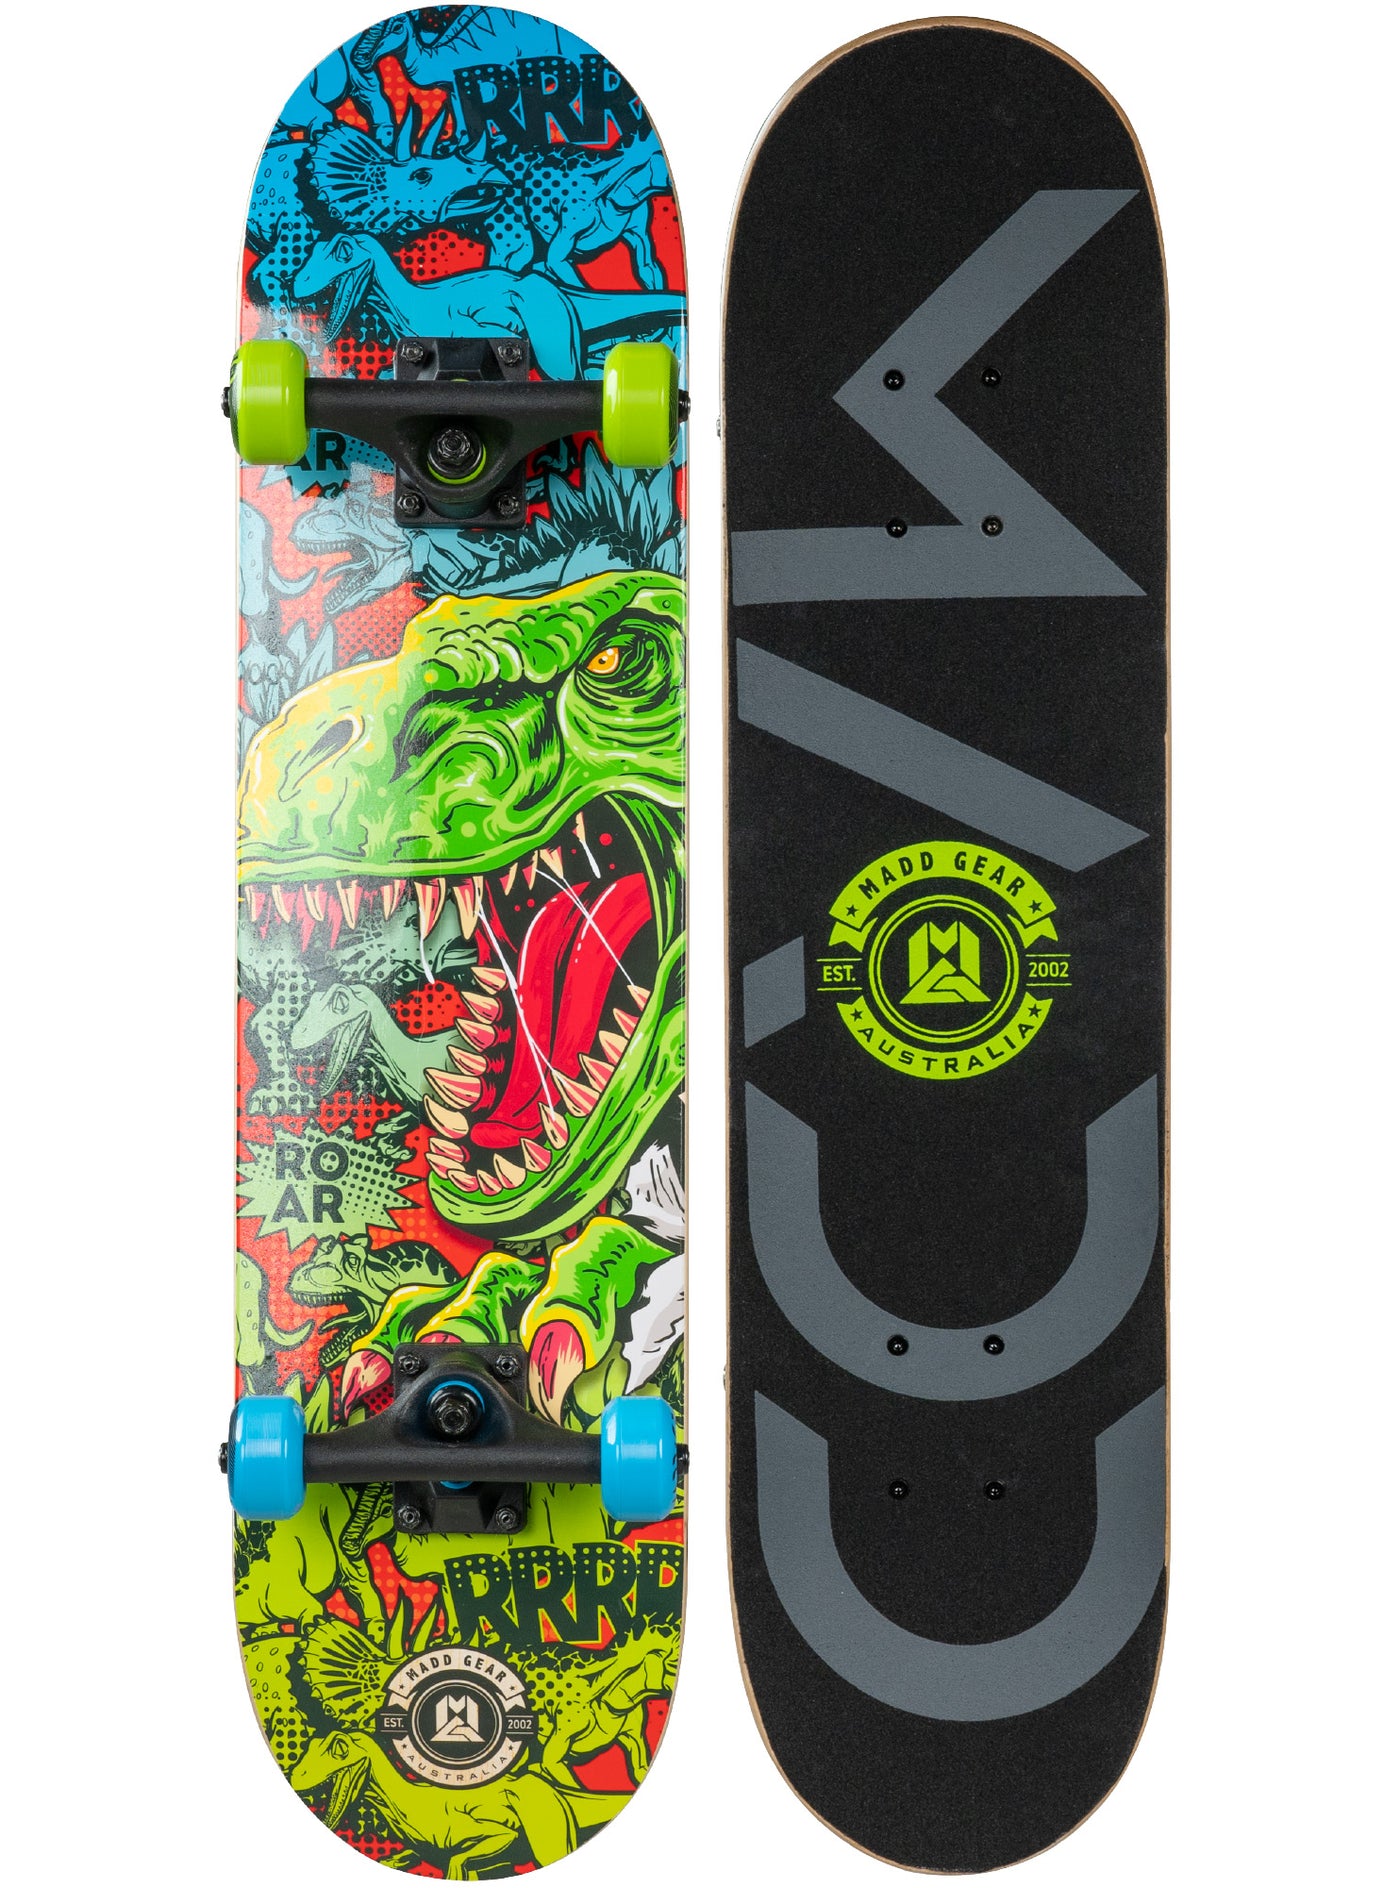 Madd Gear 31" Board Skateboard Popsicle Complete High Quality Maple Ply Kids Childrens Trick Skate Park Cool Graphics Green Blue Dinosaur